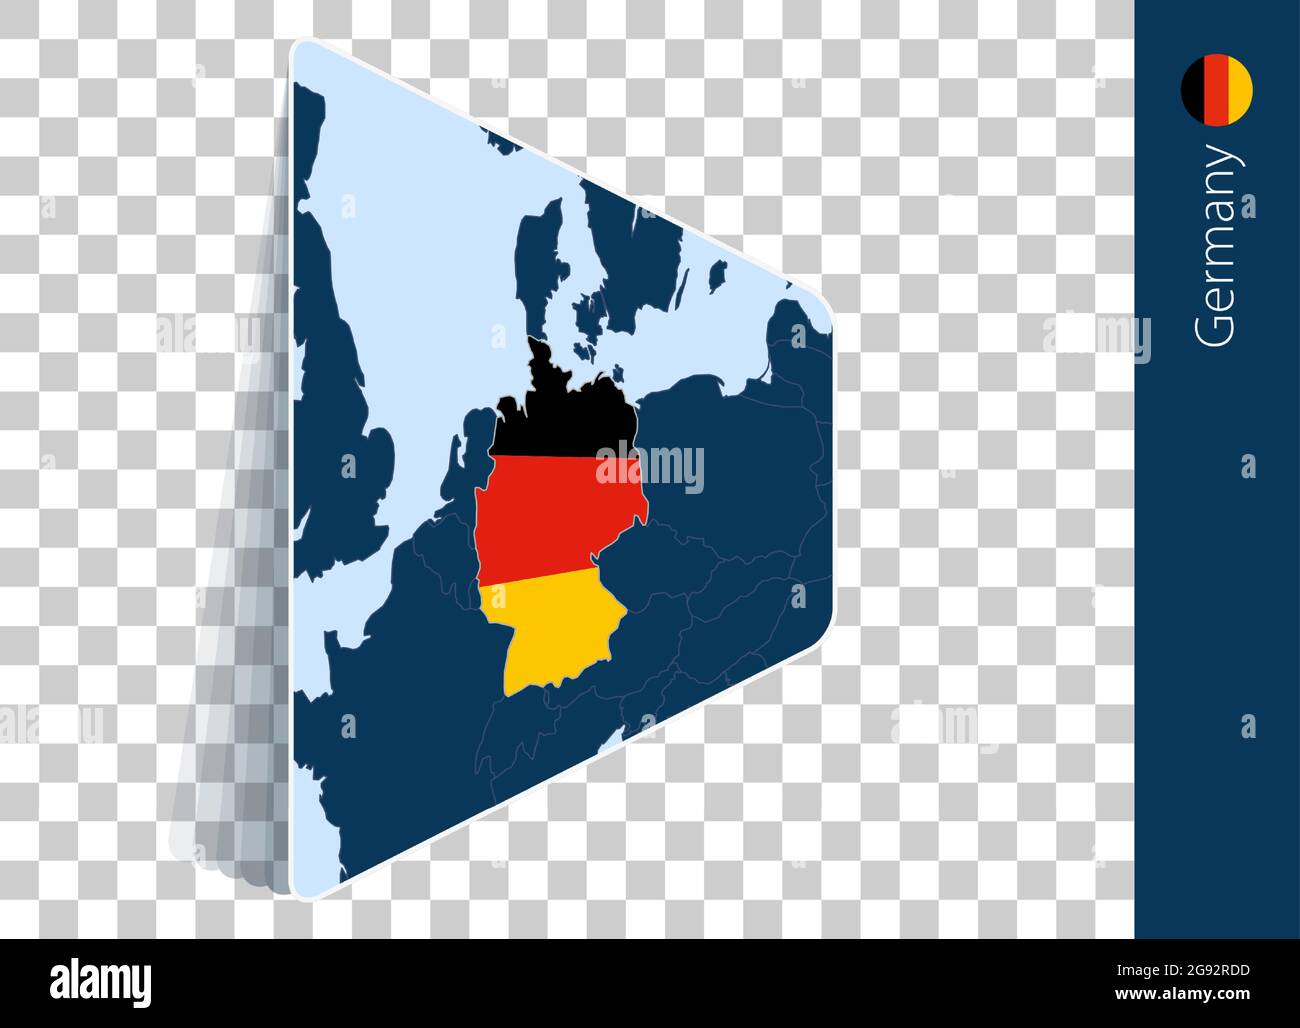 Germany map and flag on transparent background. Highlighted Germany on blue vector map. Stock Vector